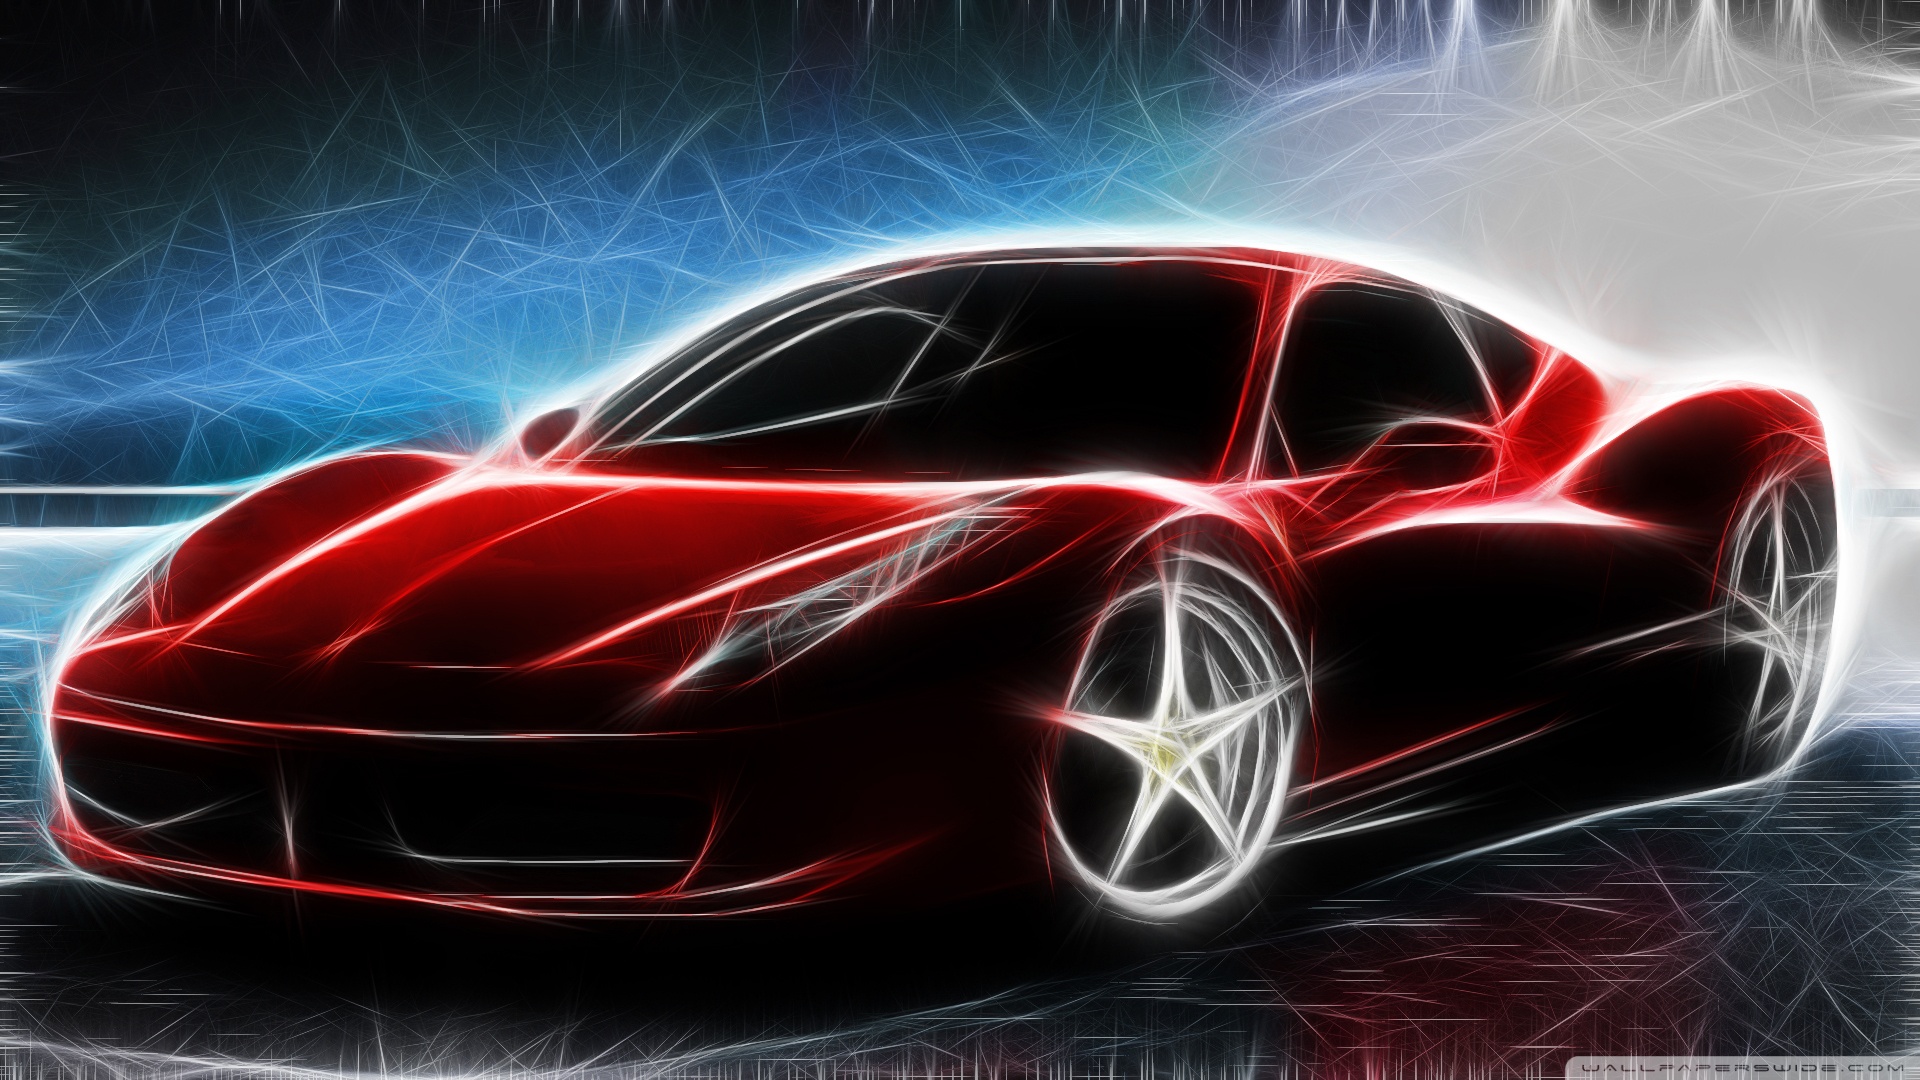 Coolest Collection Of Ferrari Wallpaper Amp Background In HD